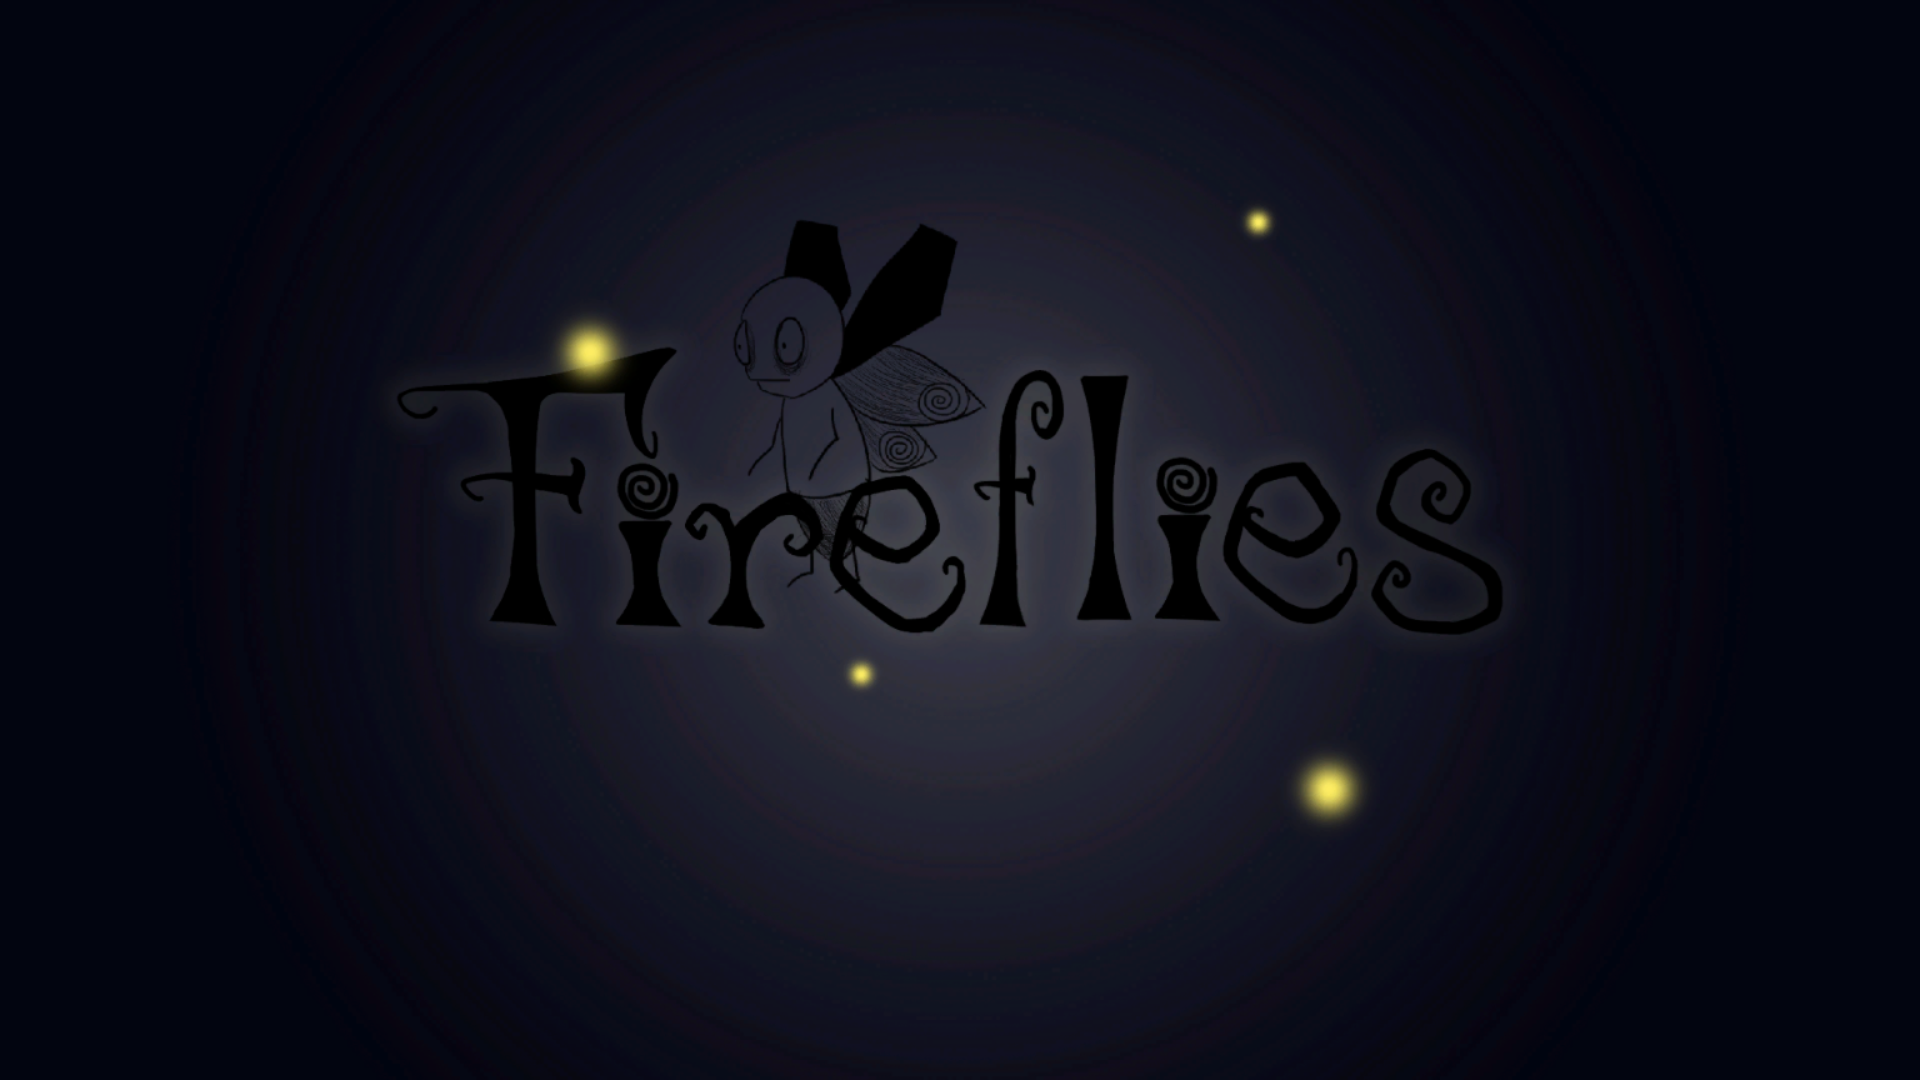 Fireflies - Isometric exploration in the darkness